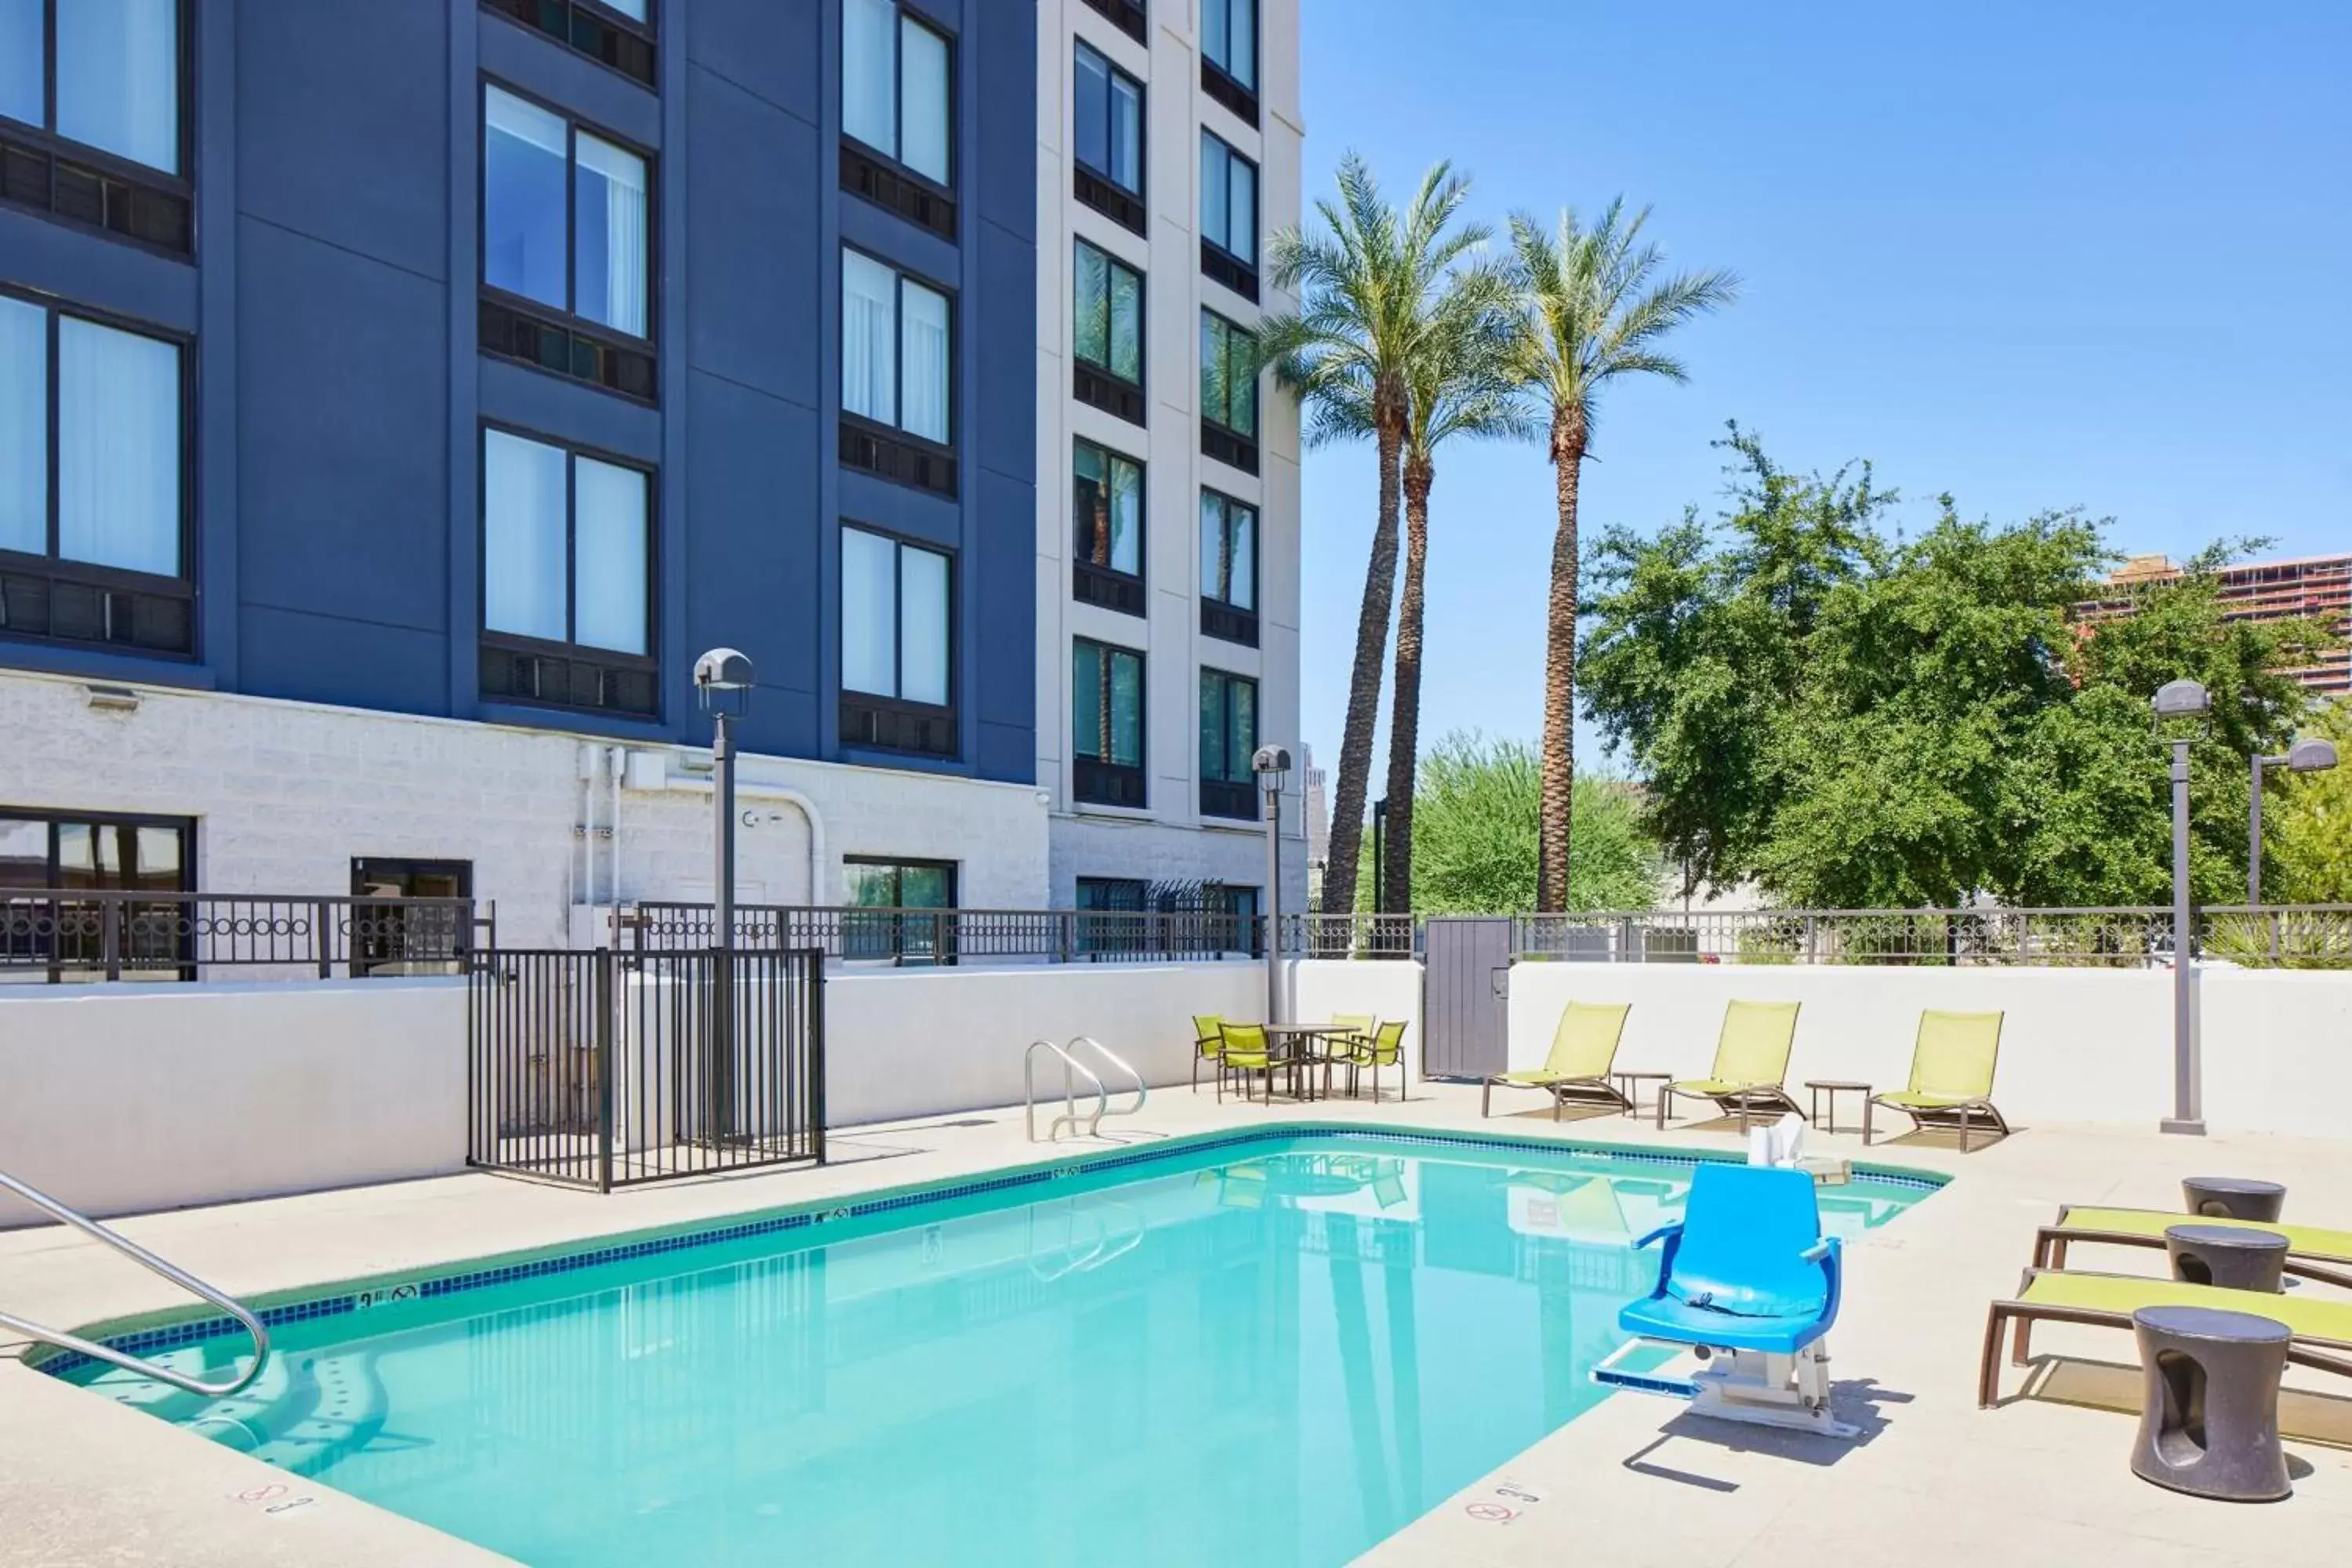 Swimming Pool in SpringHill Suites Phoenix Downtown